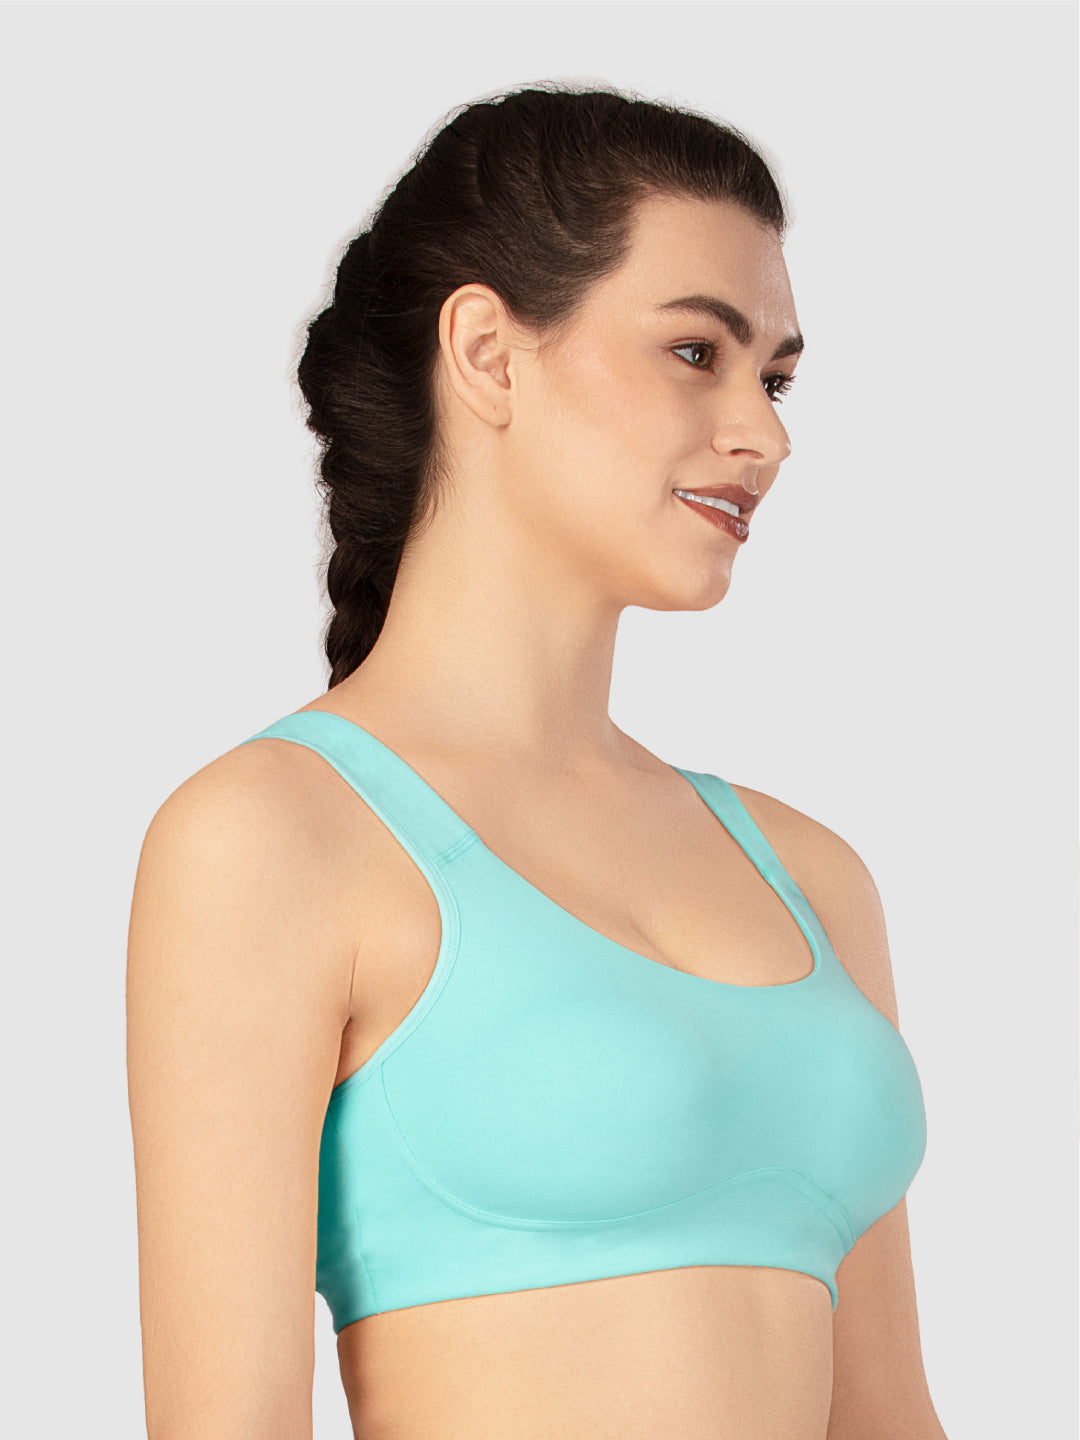 Lovable Pista Green Non Padded Wirefree Full Coverage Sports Bra - LE-240-Pista Green